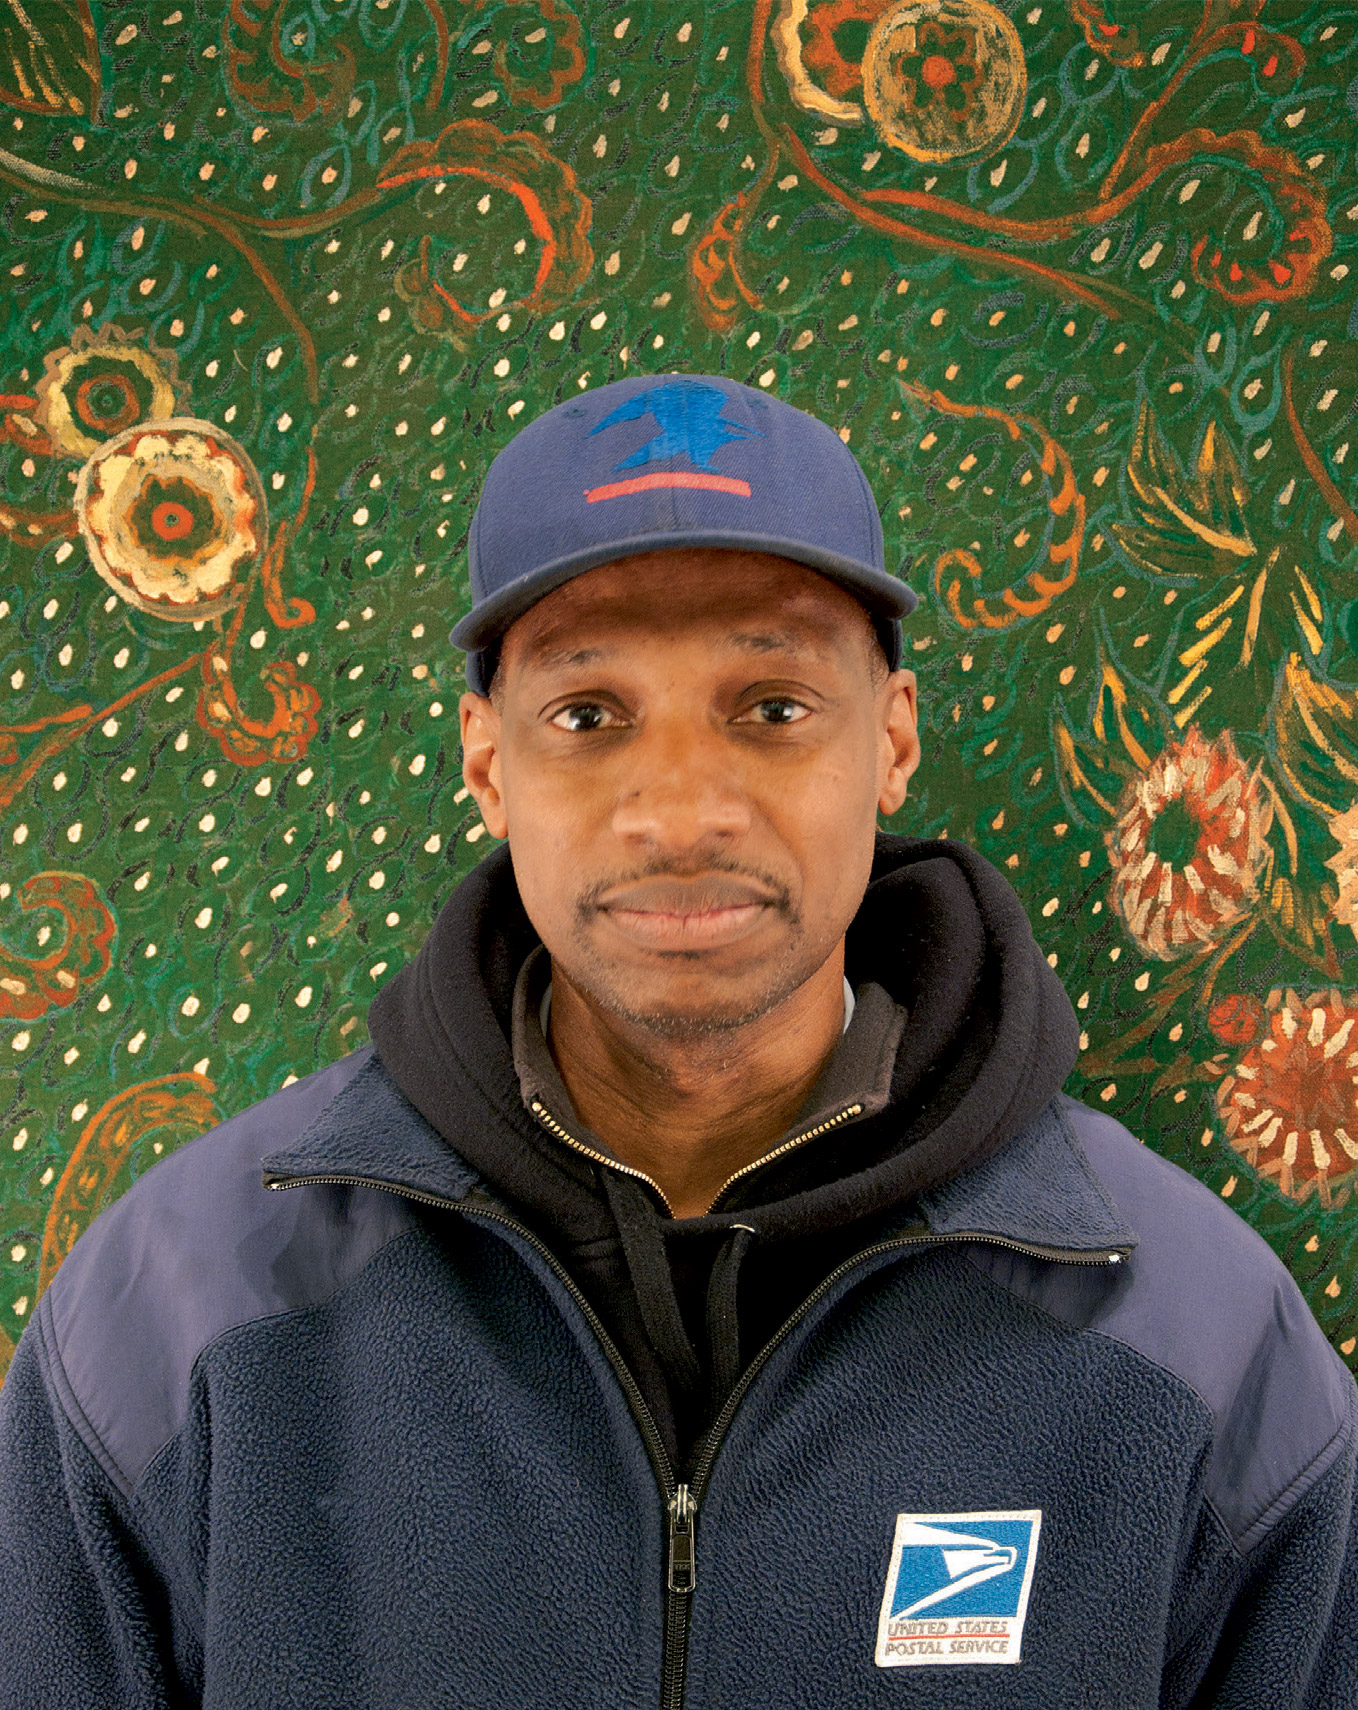 Postcard of the United States postal worker Raymond Bullard in front of a background made famous by Van Gogh’s iconic portrait of the postman Joseph Roulin.